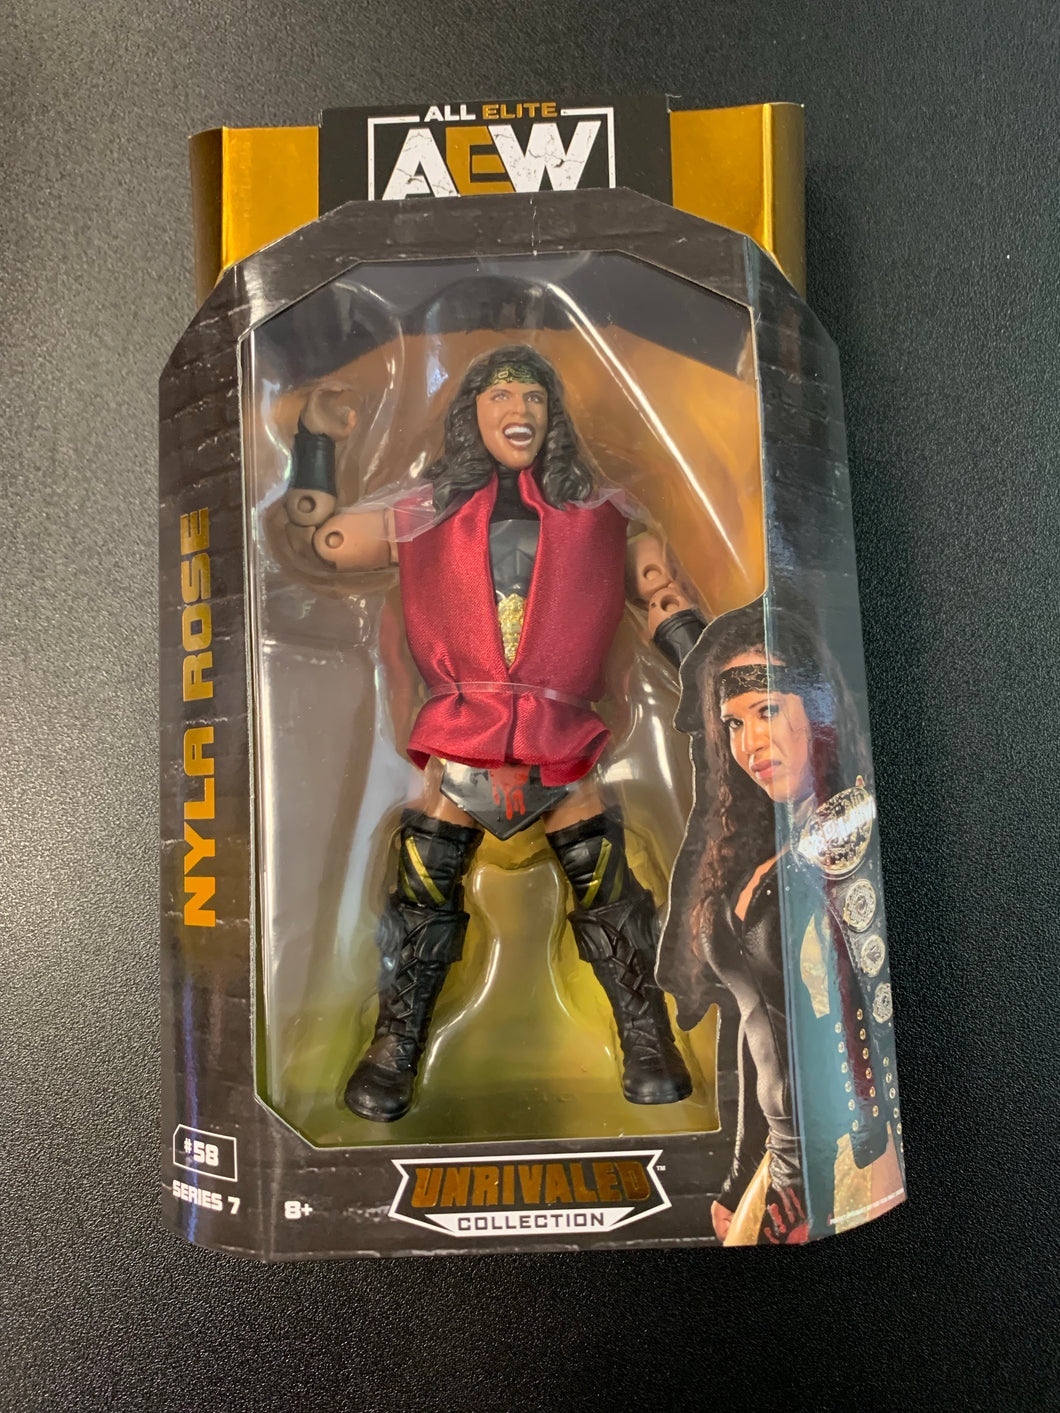 AEW NYLA ROSE UNRIVALED COLLECTION #58 SERIES 7